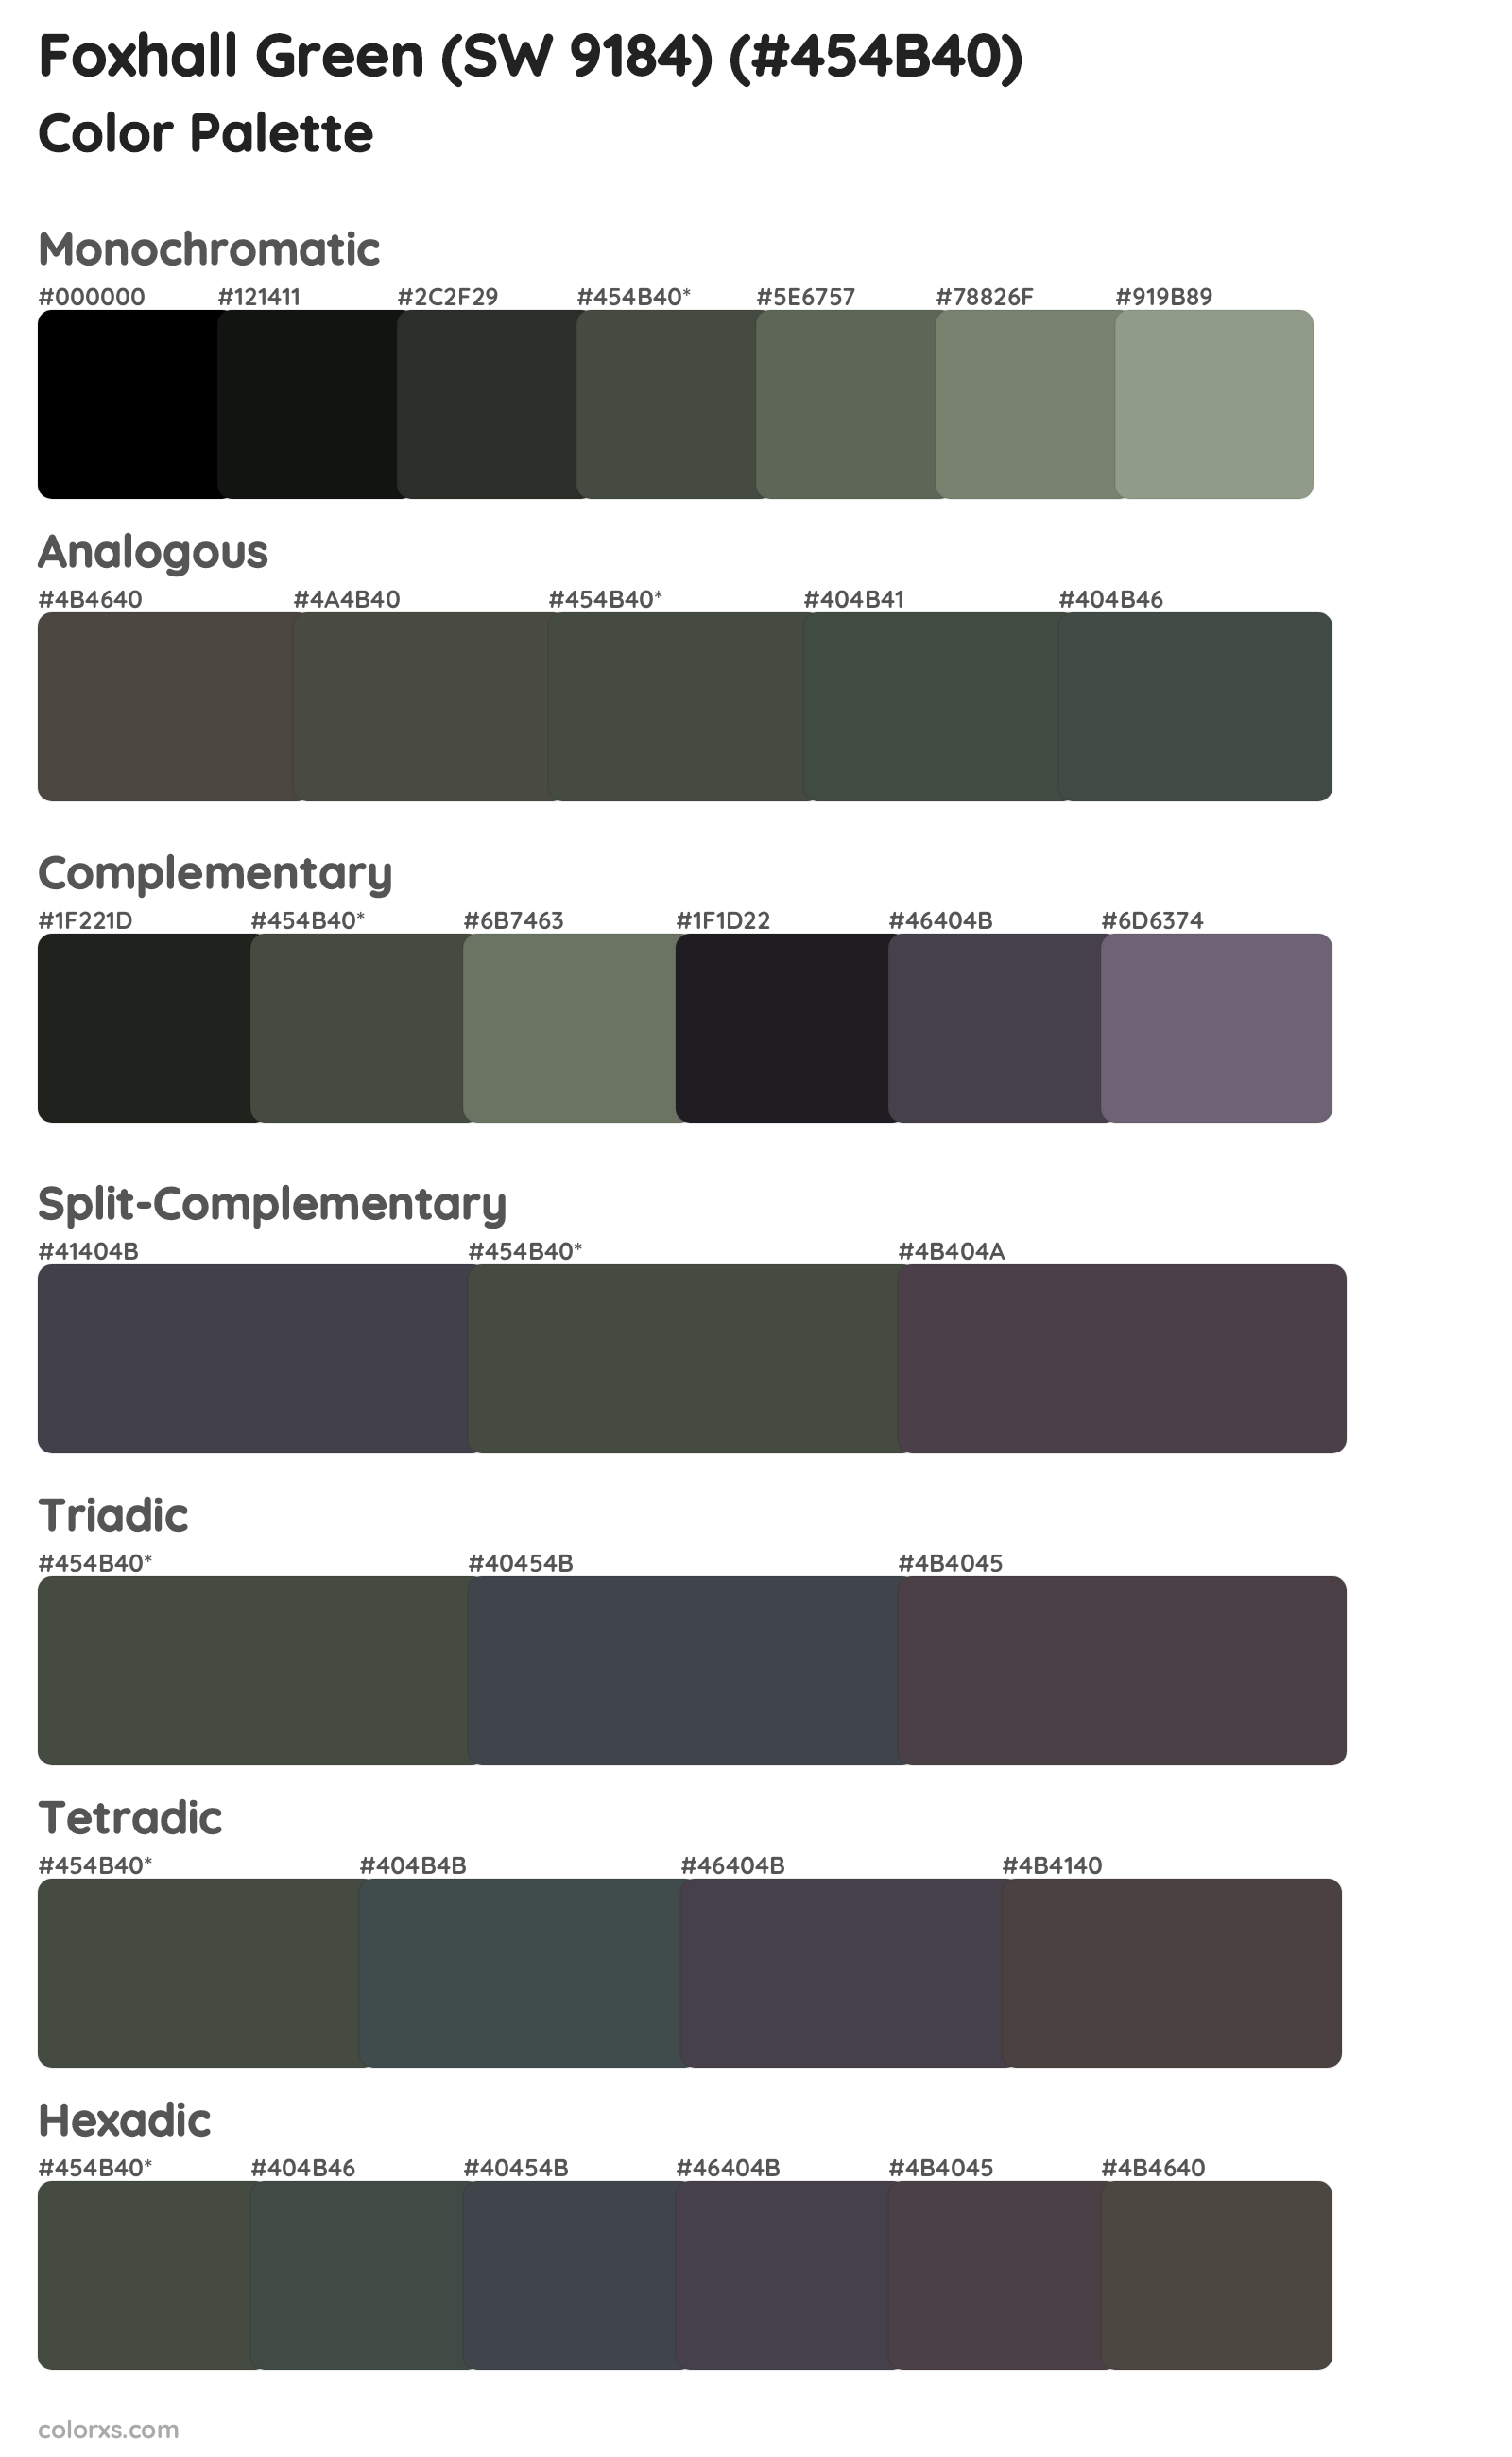 Foxhall Green (SW 9184) Color Scheme Palettes